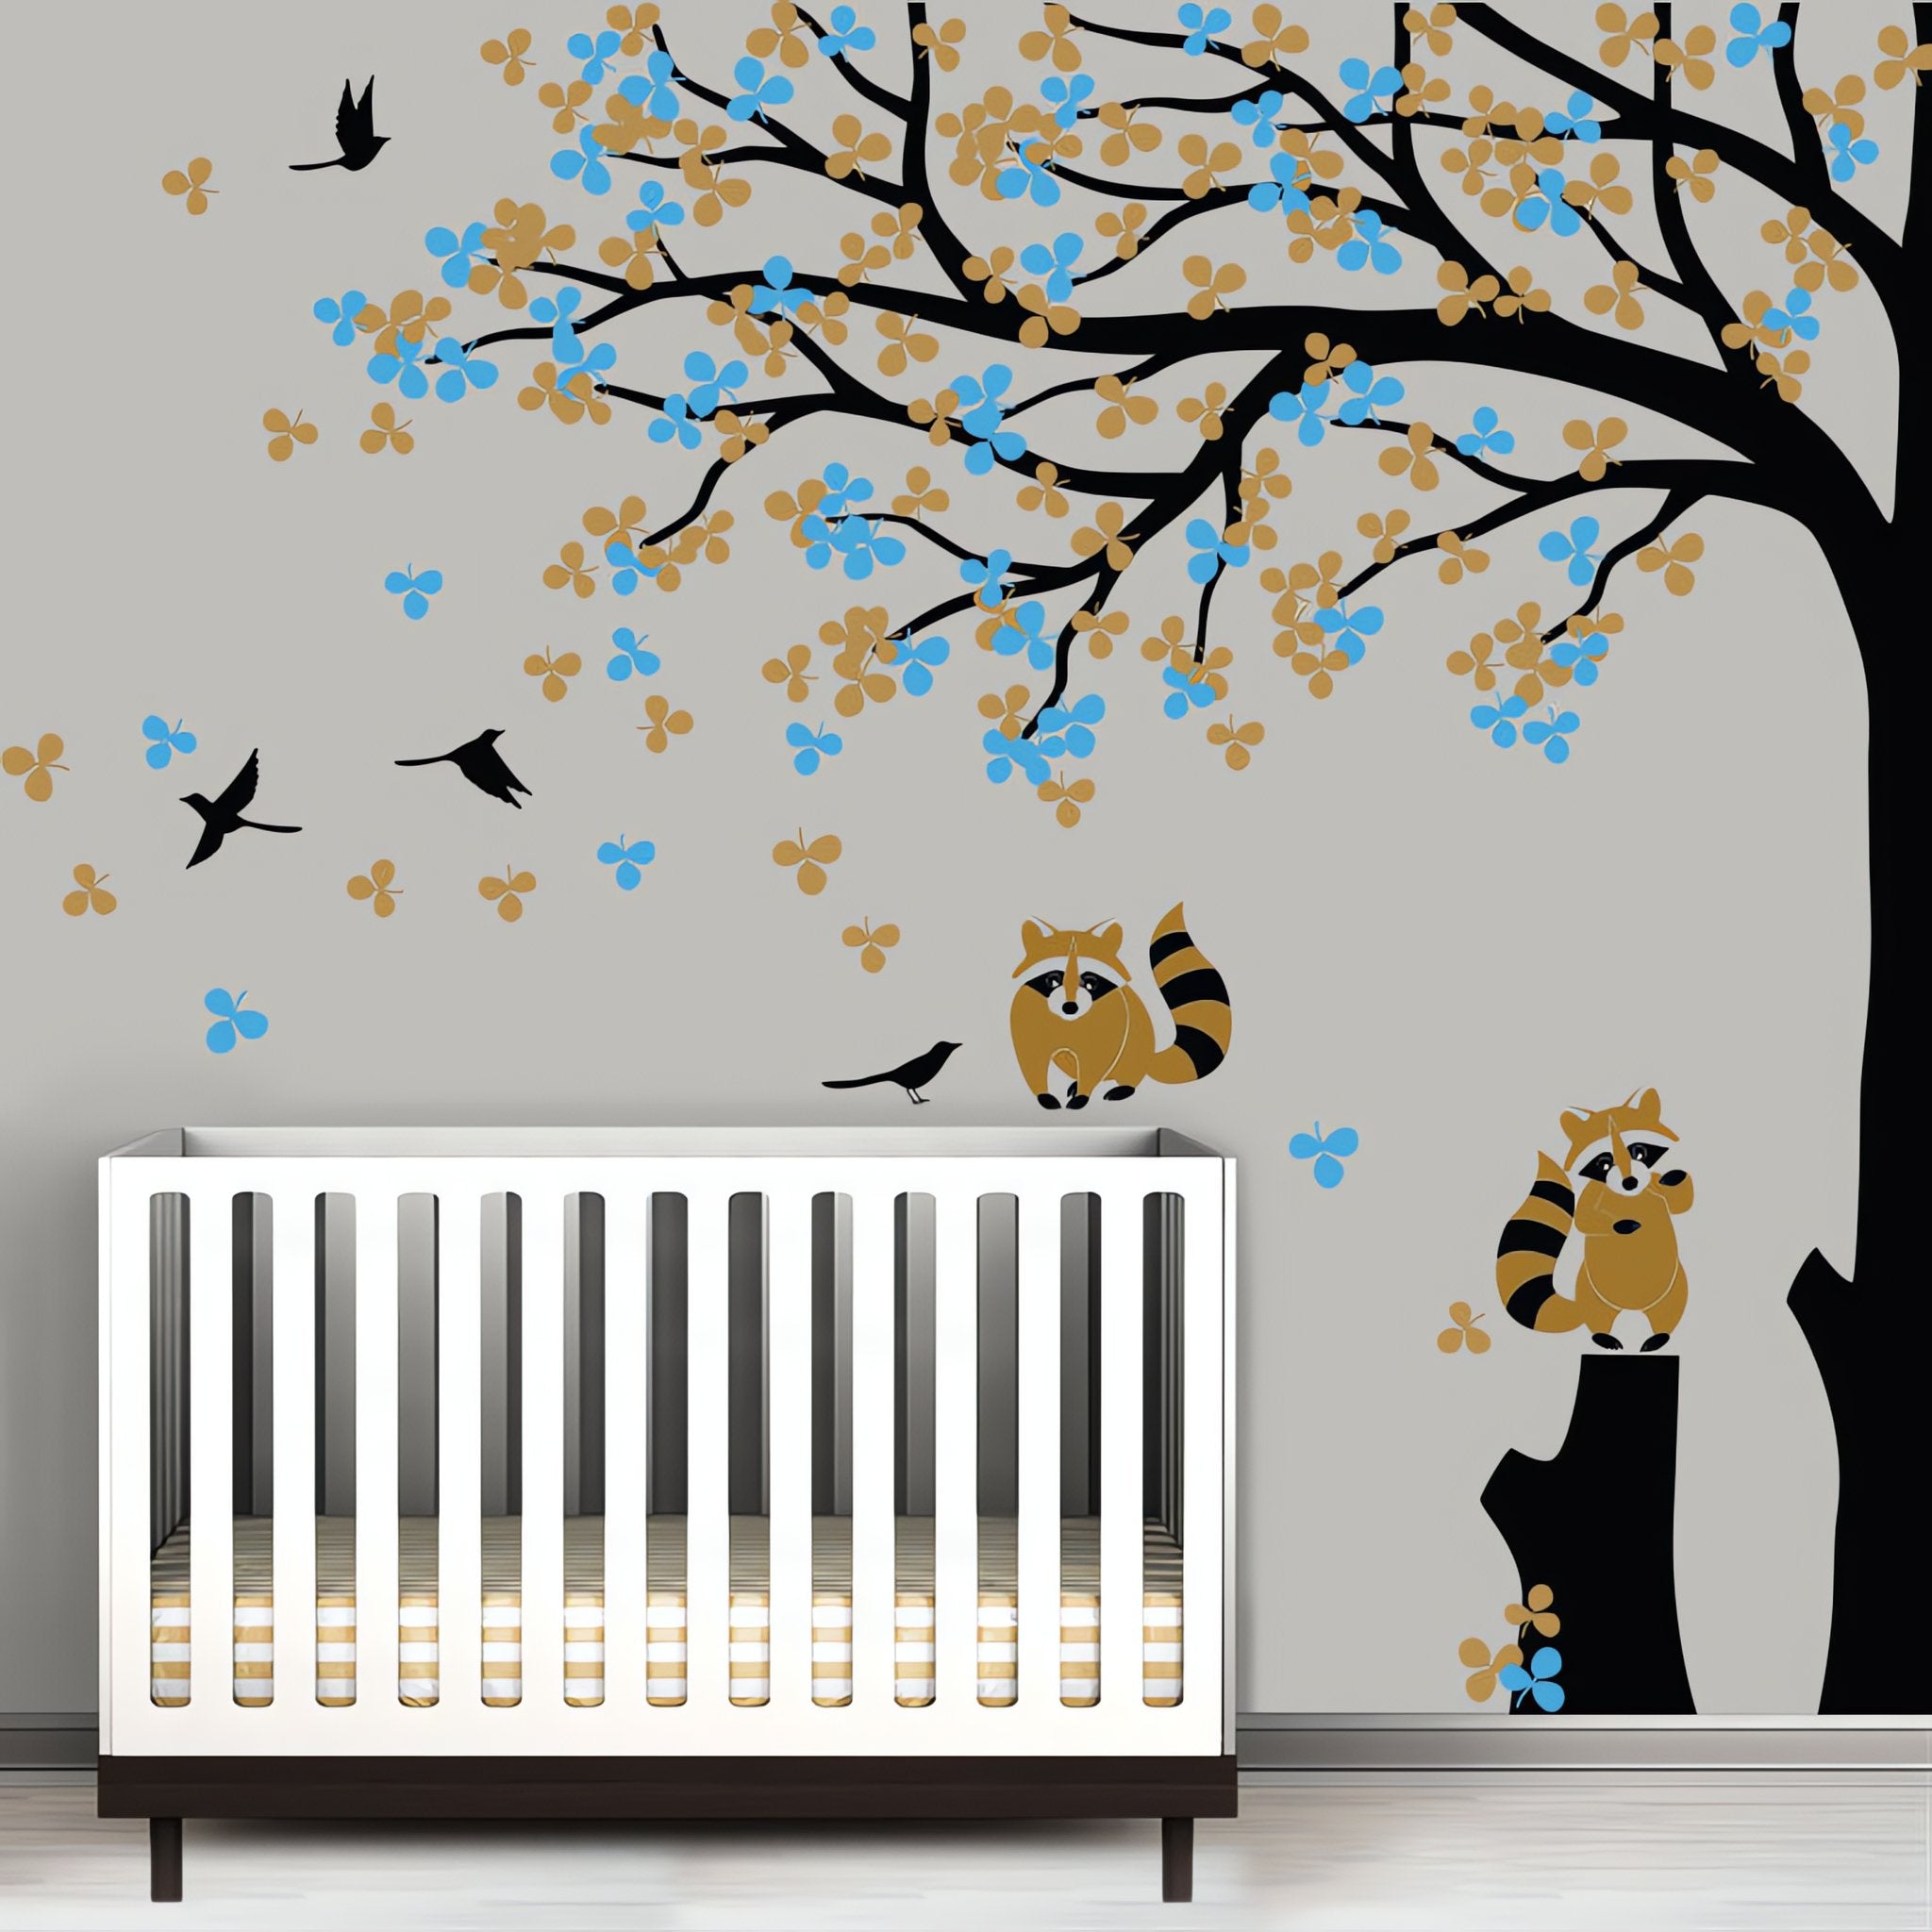 Tree wall sticker with leaves blowing and birds in a nursery with a crib.